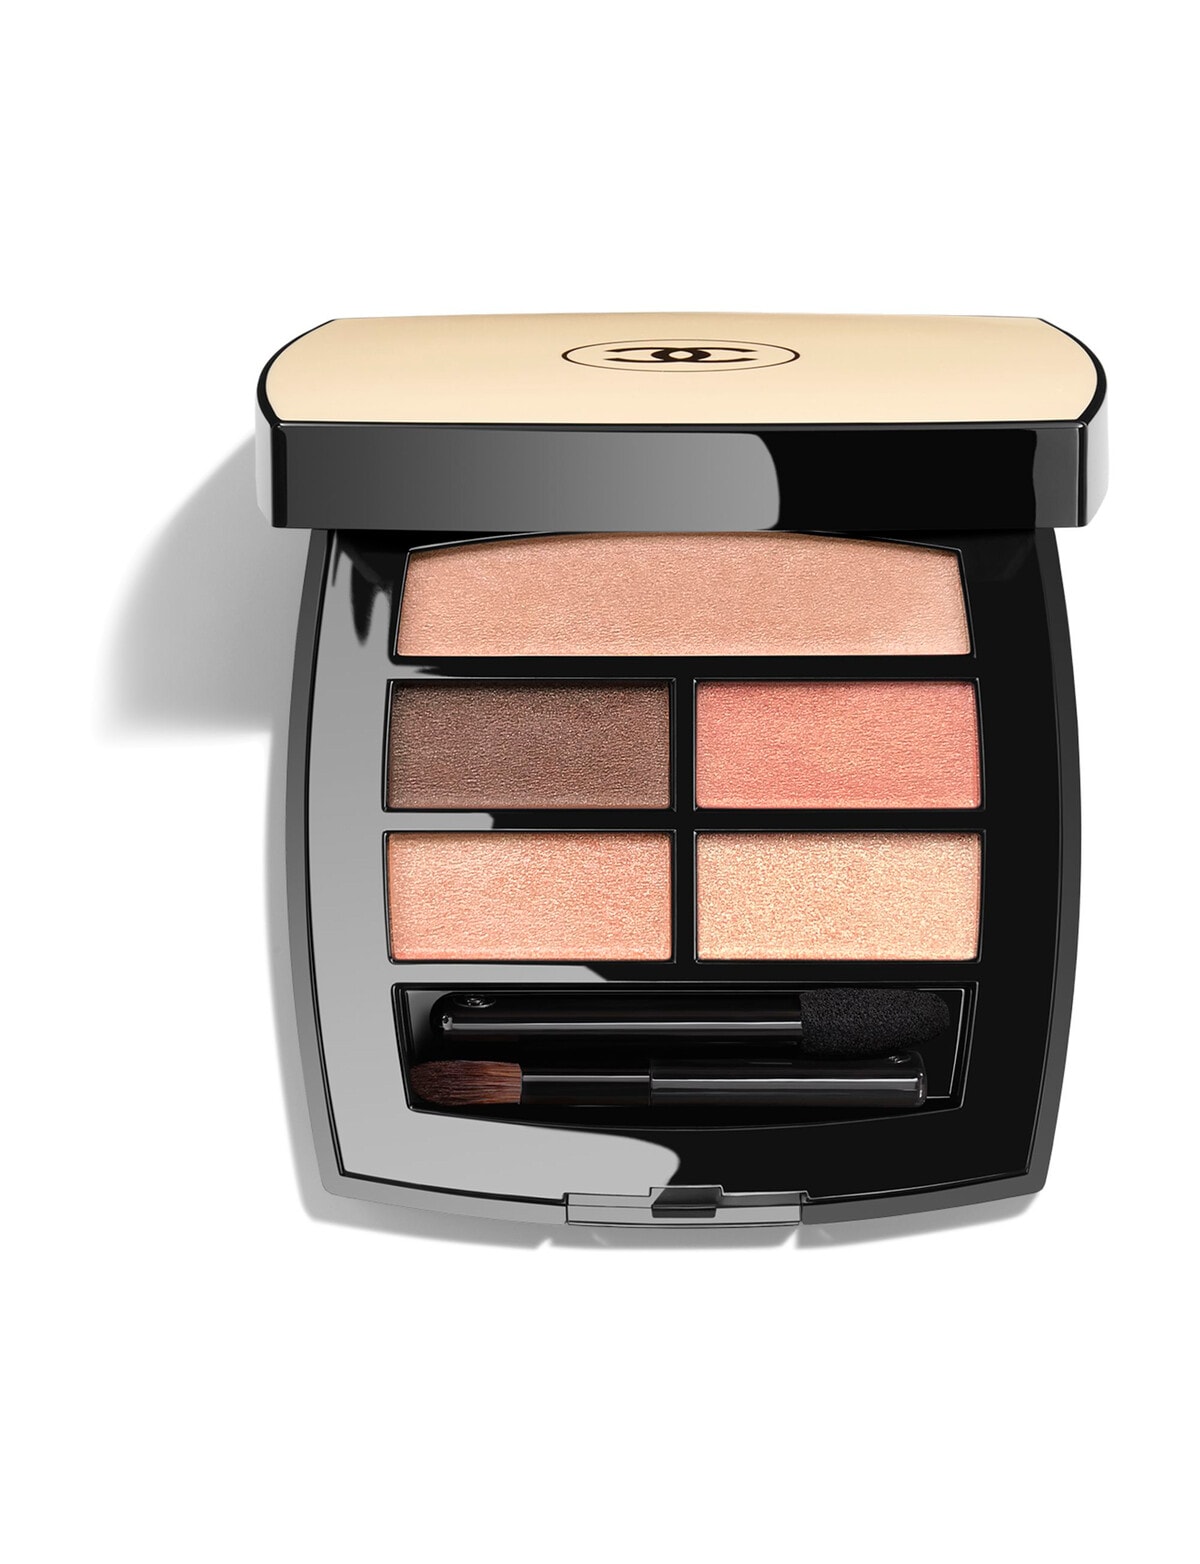 CHANEL LES BEIGES EYESHADOW PALETTE Healthy Glow Natural Eyeshadow Palette  - EYE PALETTE